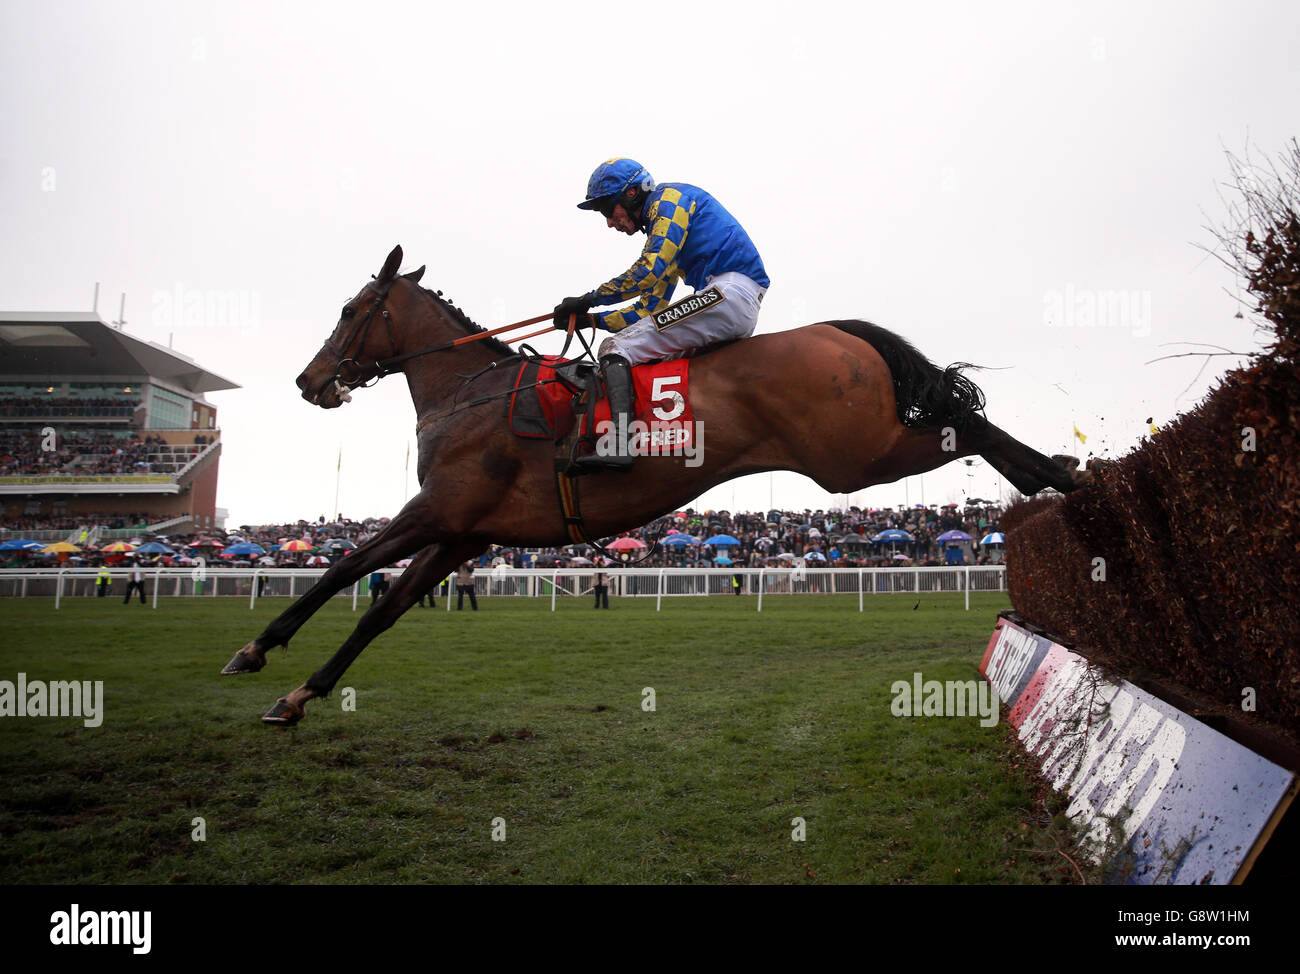 Maggio ridden by jockey James Reveley clears a fence on the way to winning the Betfred Handicap Chase during Grand National Day of the Crabbie's Grand National Festival at Aintree Racecourse, Liverpool. Stock Photo